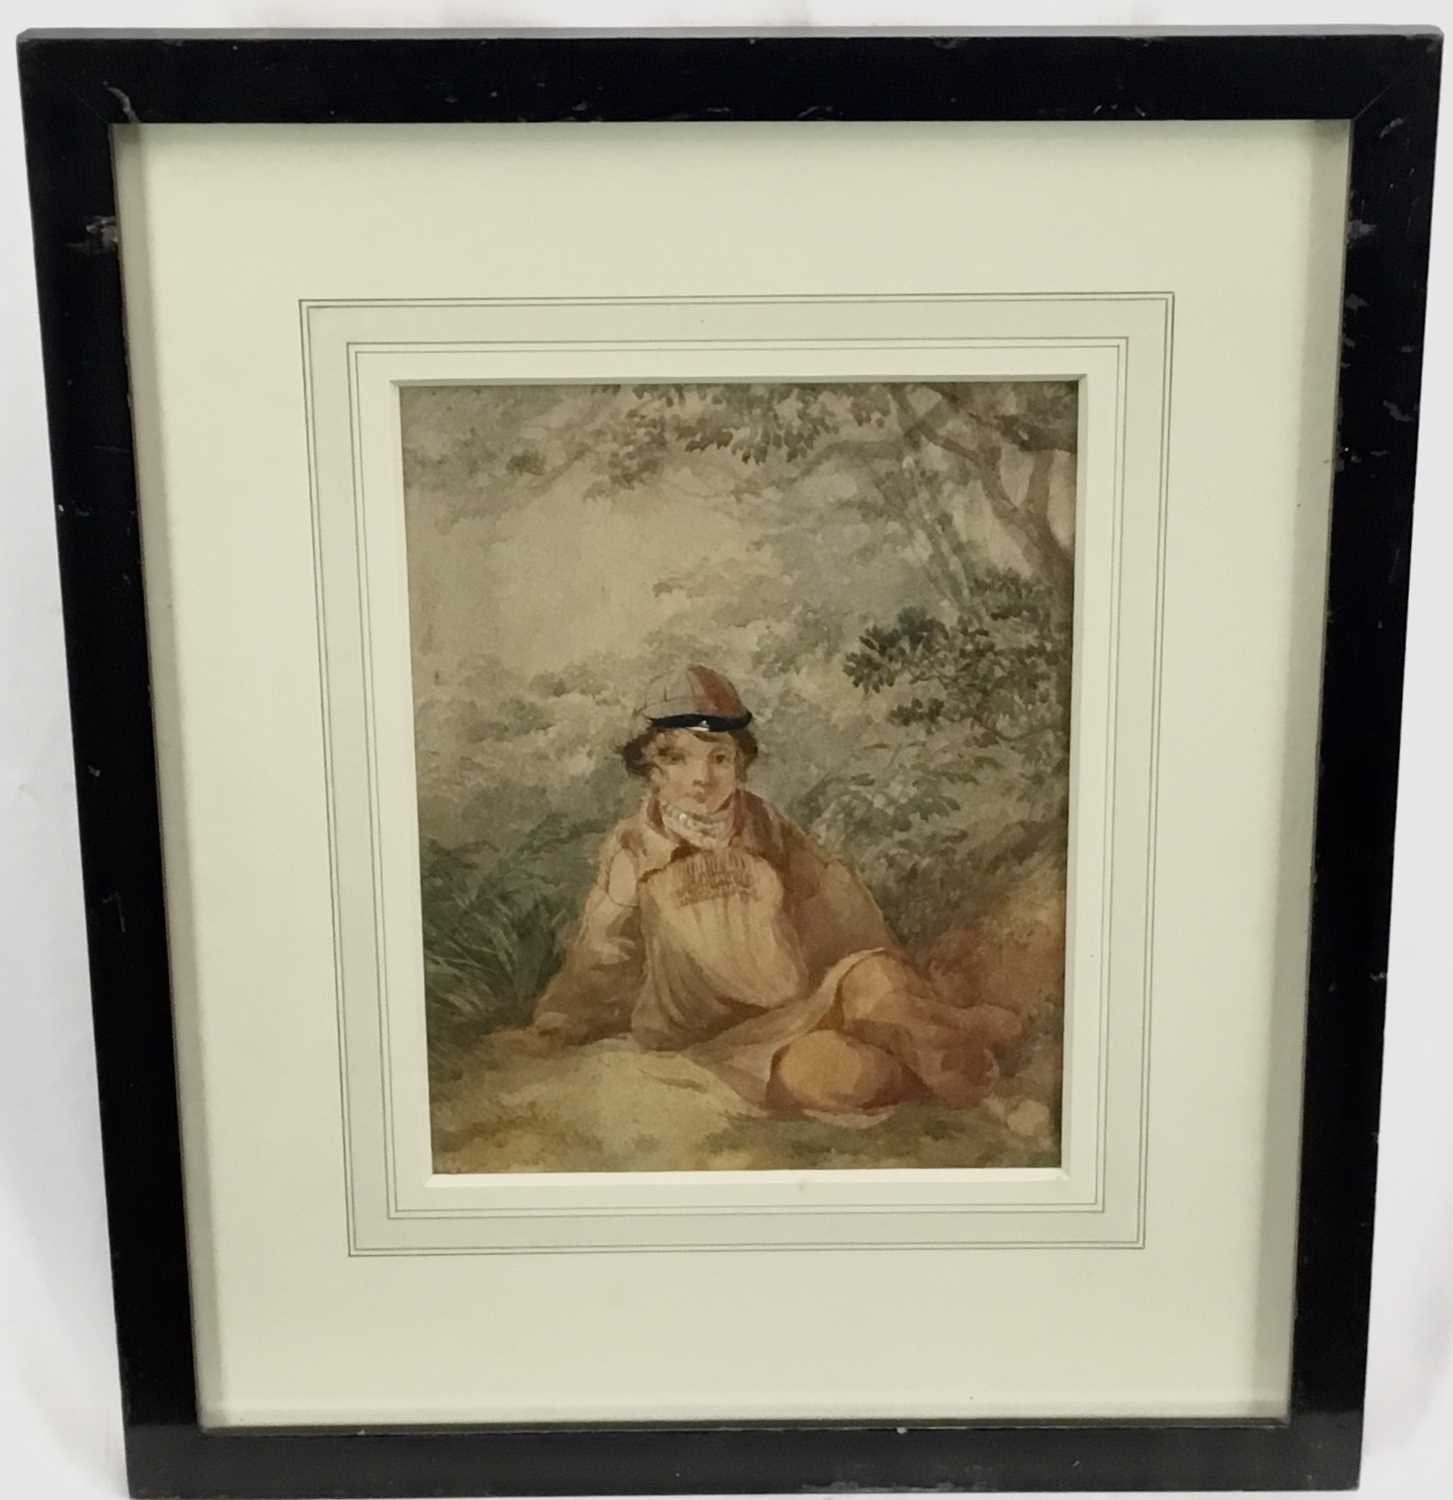 Lot 93 - Early to mid 19th century British School, watercolour of a boy sitting beneath a tree wearing a school cap. Framed and mounted. Overall including frame 40x34cm